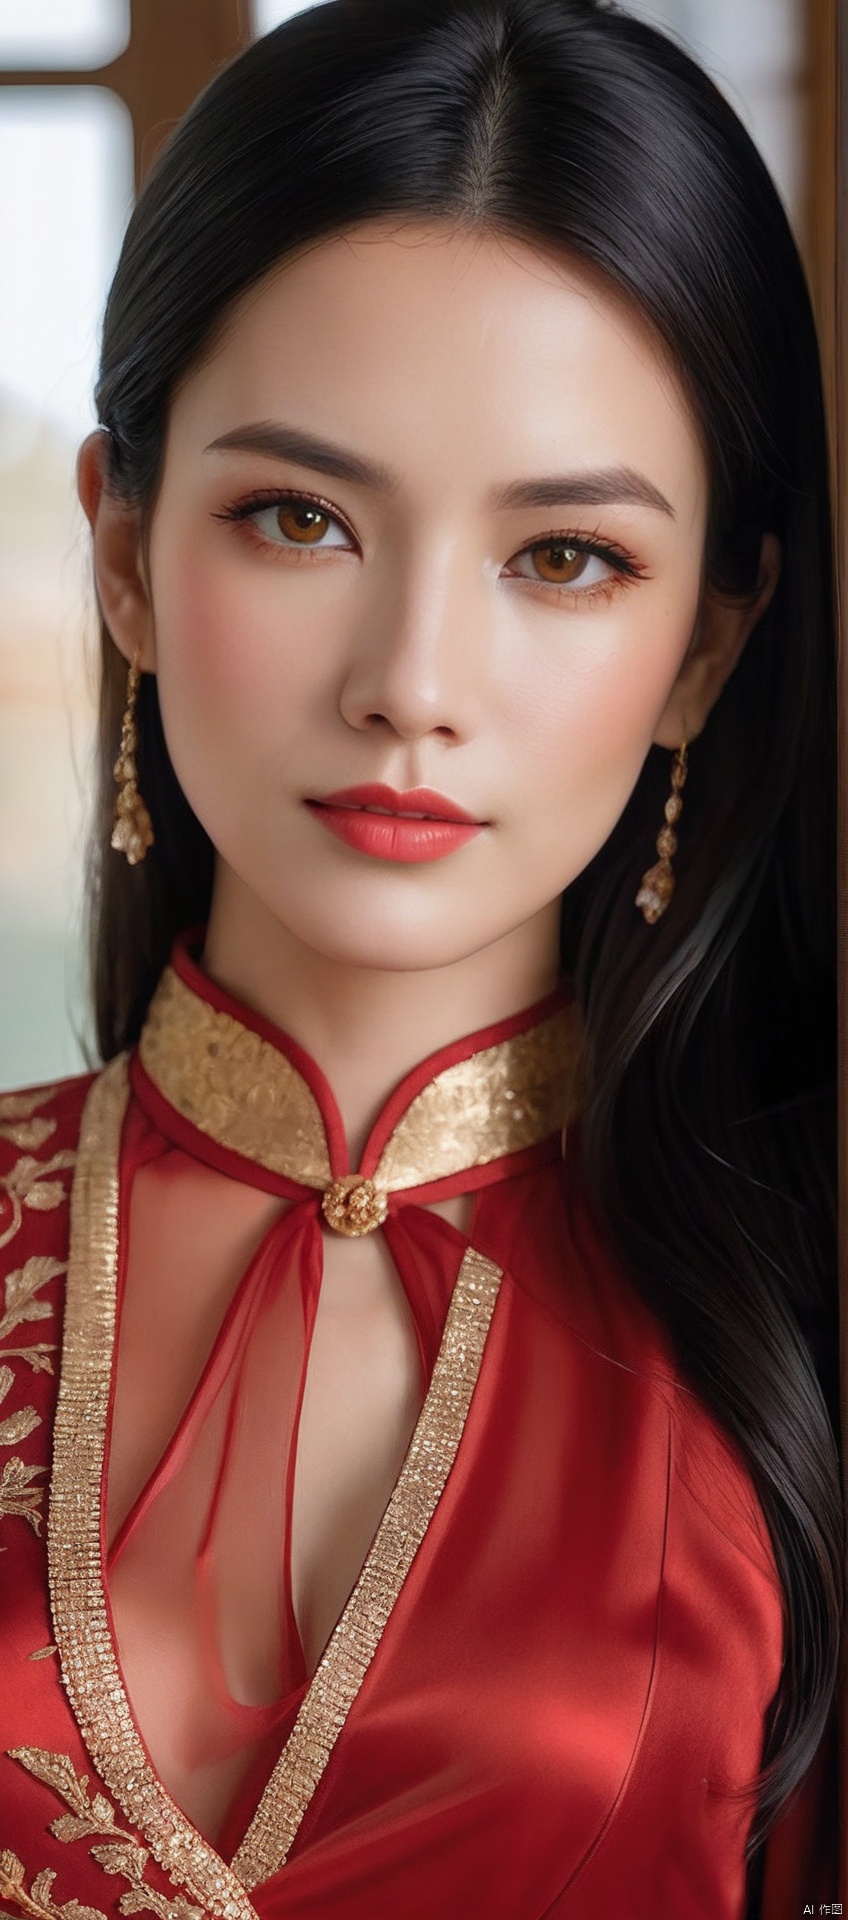 8k,RAW, Fujifilm XT3, masterpiece, best quality, photorealistic,1girl,solo, diamond stud earrings, long straight black hair, hazel eyes, serious expression, slender figure, wearing a red and gold blouse,red and gold dress,(upper body shot), (upper body view),dodger red and gold see through clothes,red and gold transparent shawl,beautiful symmetrical face,in the style of elegant clothing,high heels,g002,g001,